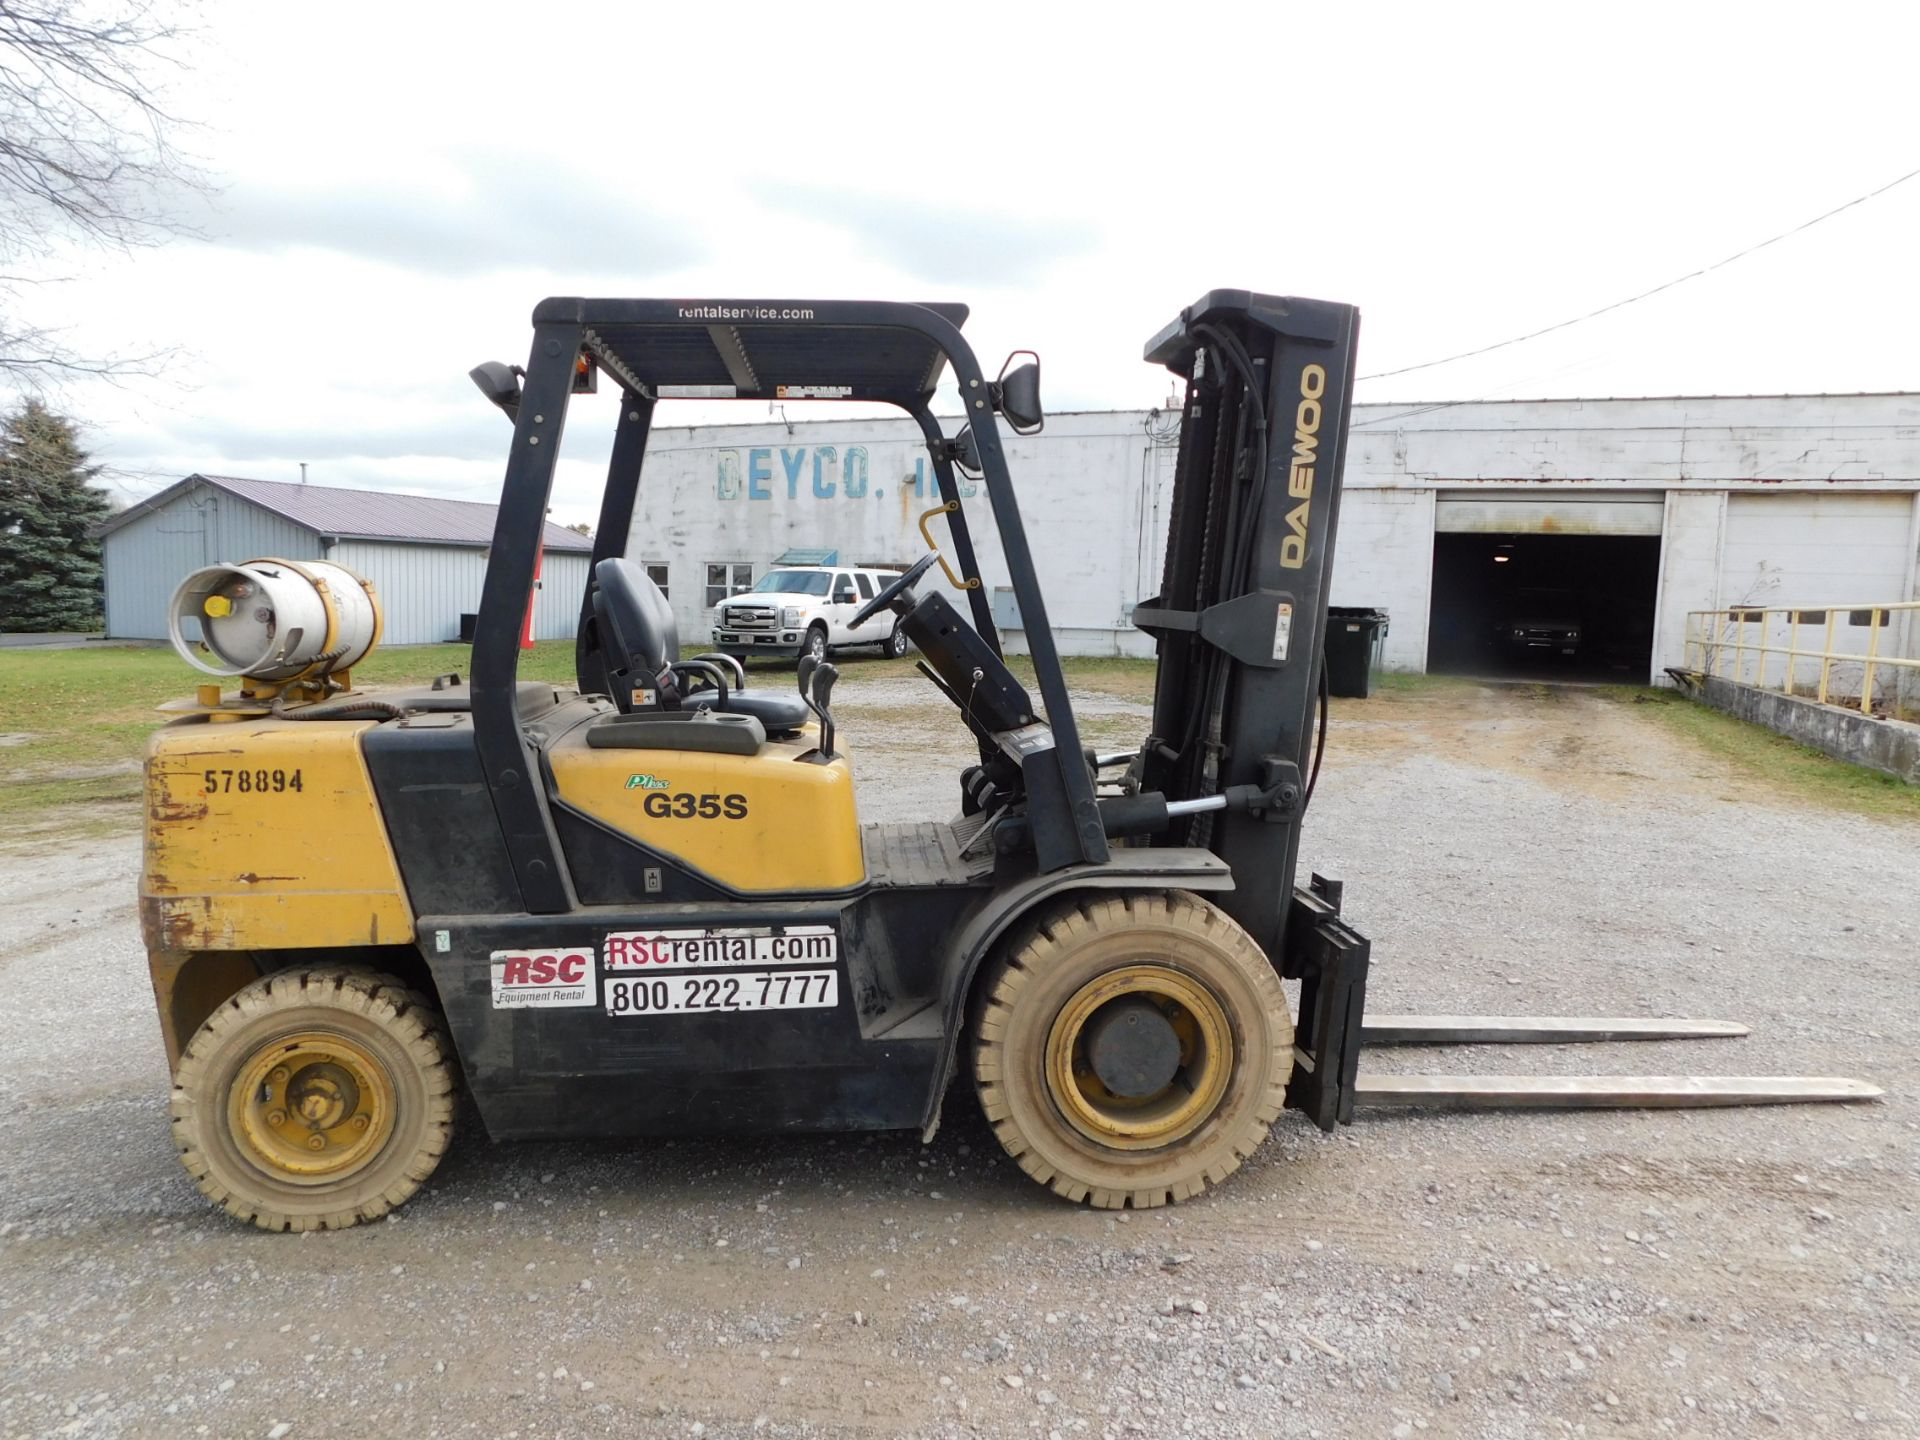 Daewoo Model G35S-2 Forklift, SN G2-00191, 6,700 lb. cap., LP, Solid Pneumatic Non-Marking Tires, - Image 7 of 20